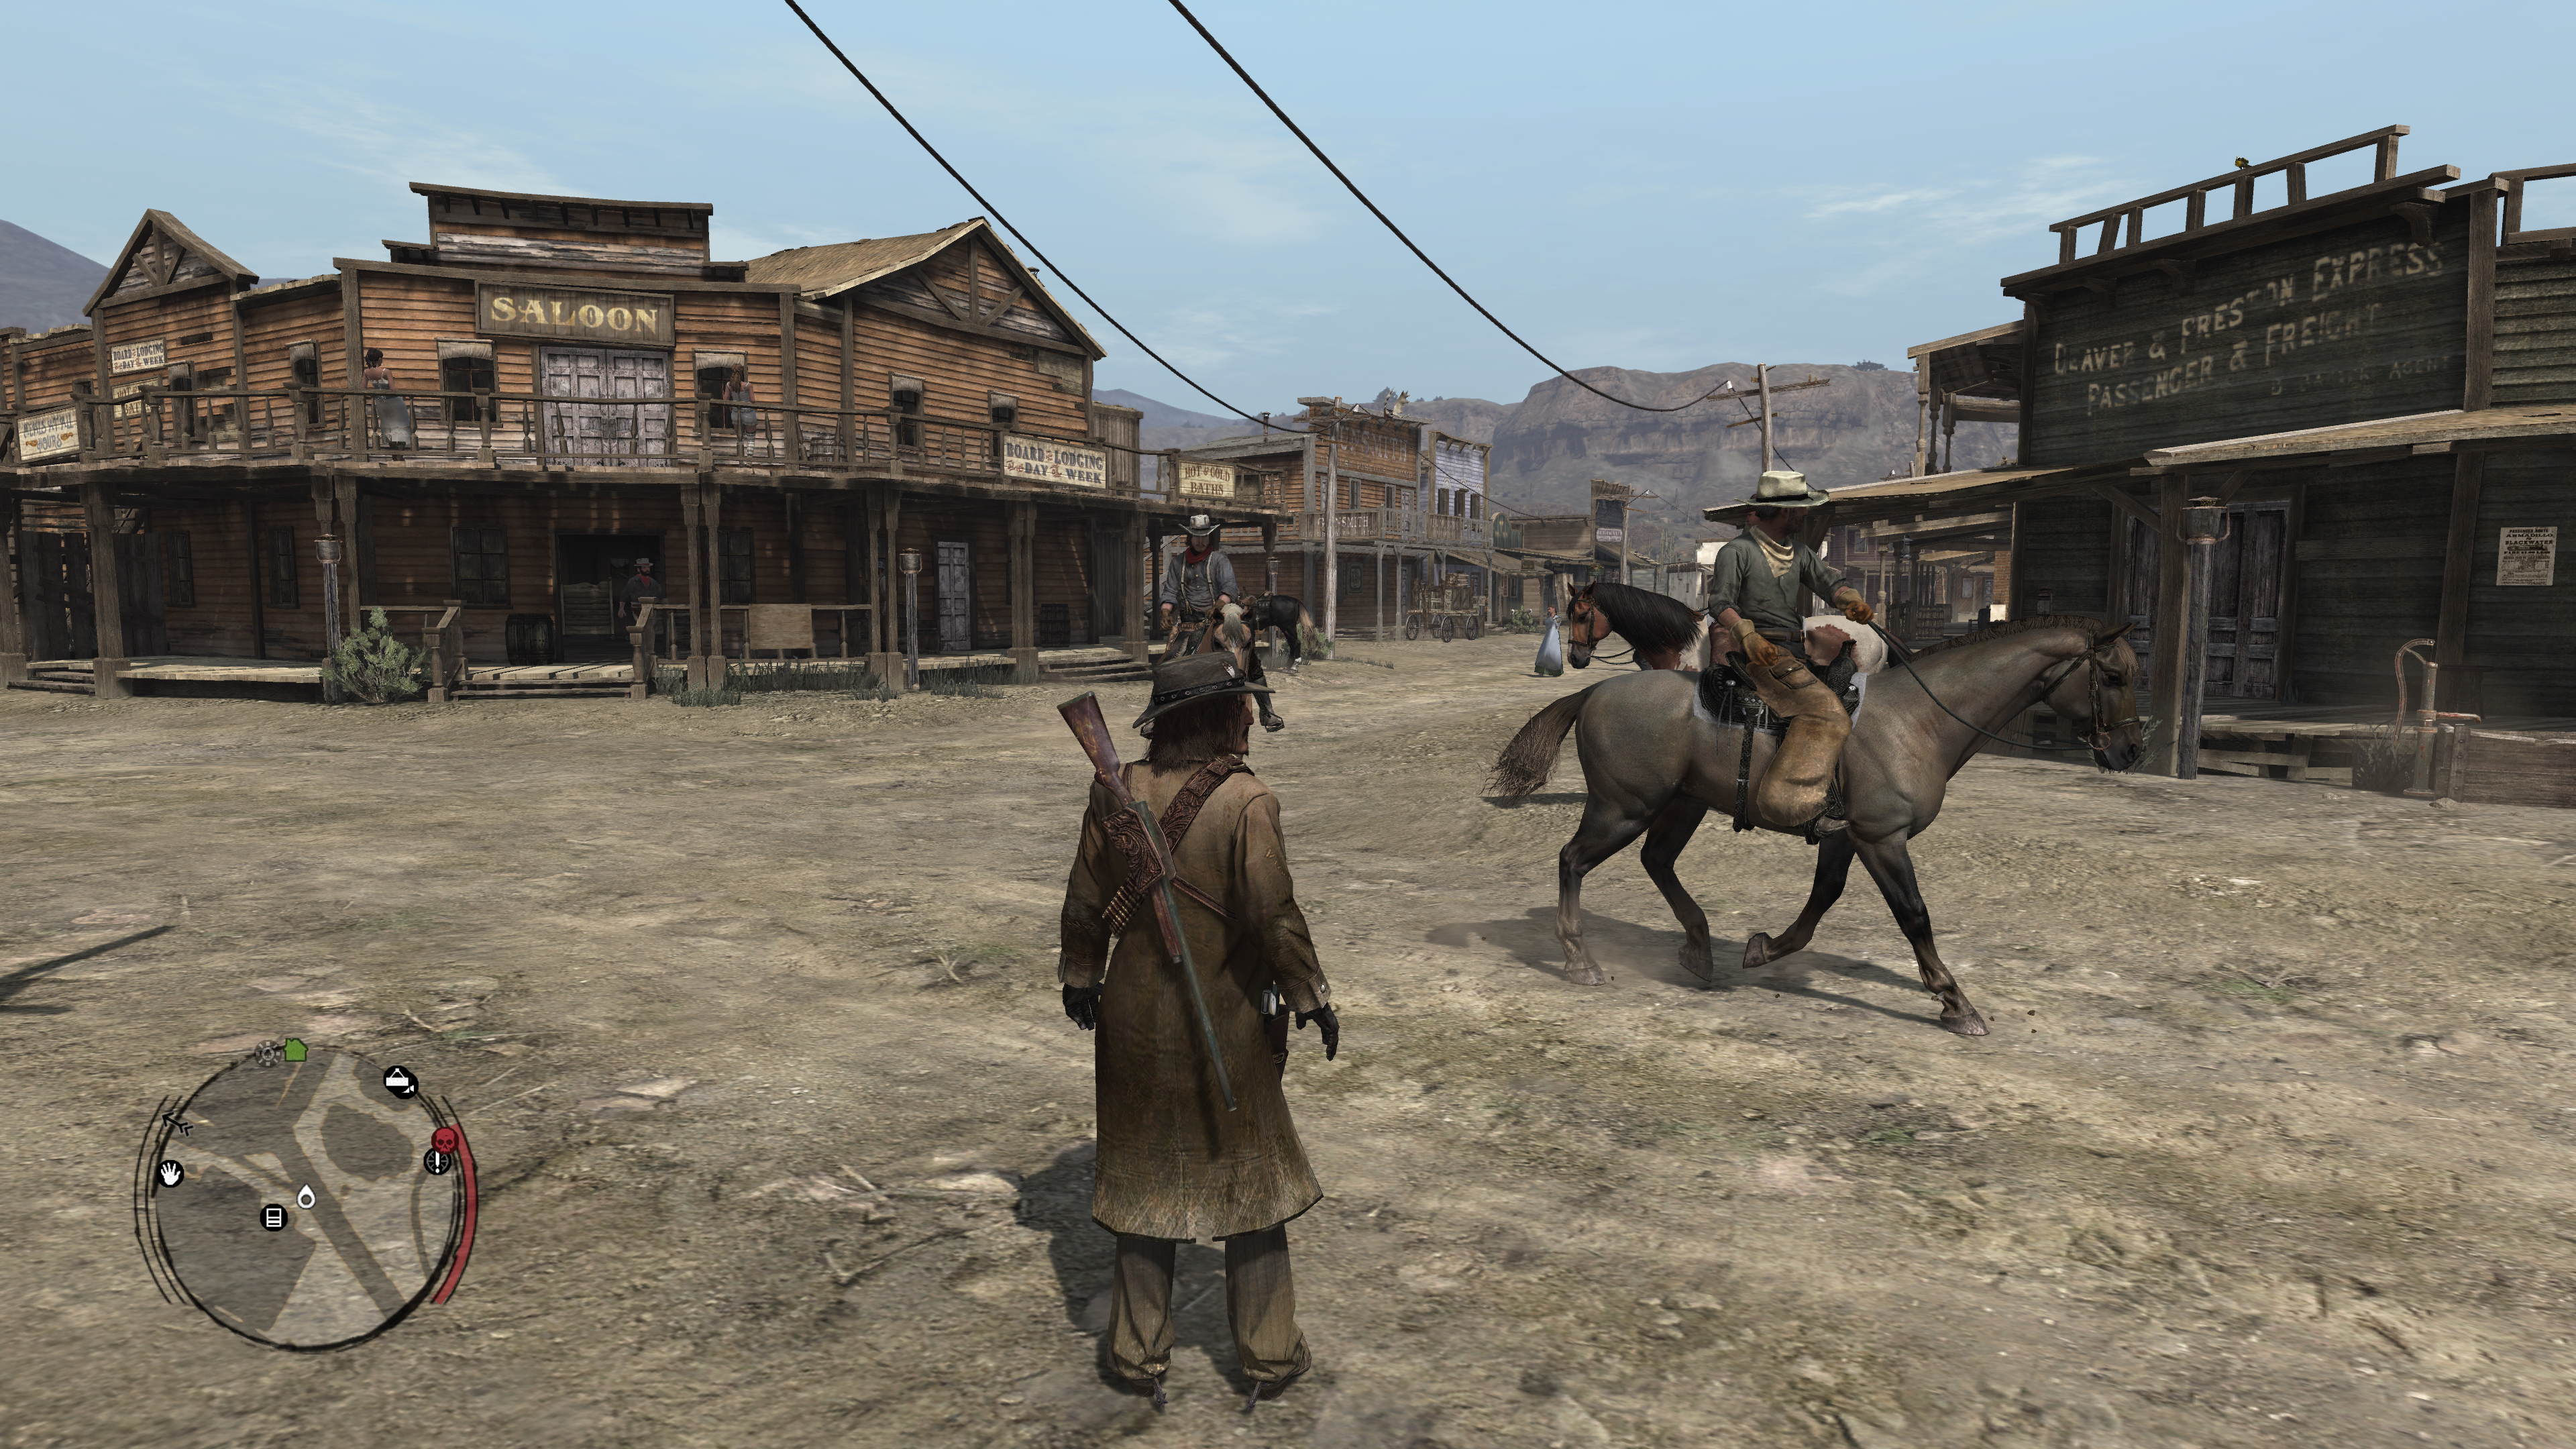 RED DEAD REDEMPTION - #1 - XBOX 360 